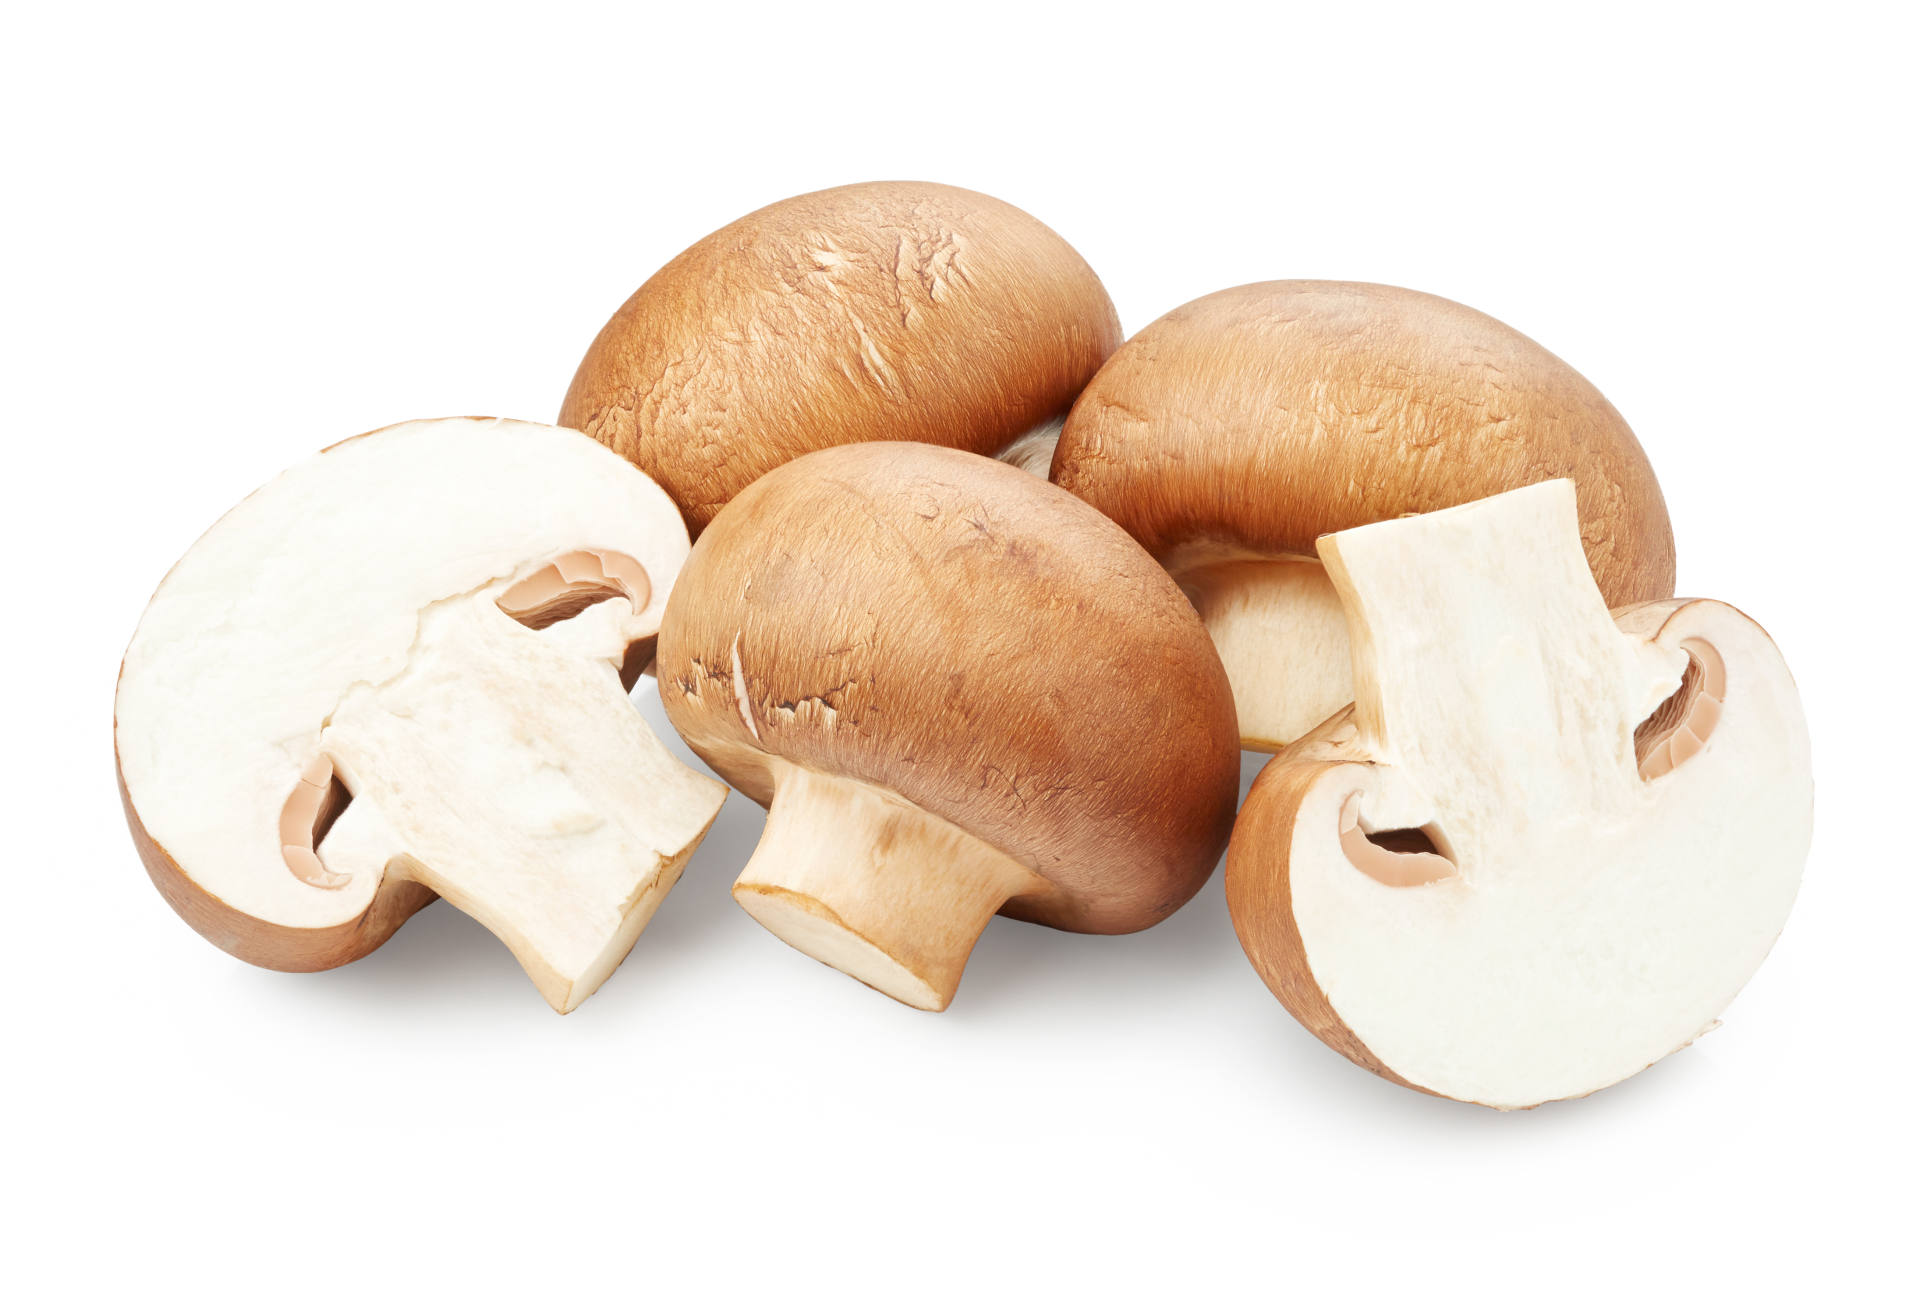 Brown mushrooms on white background